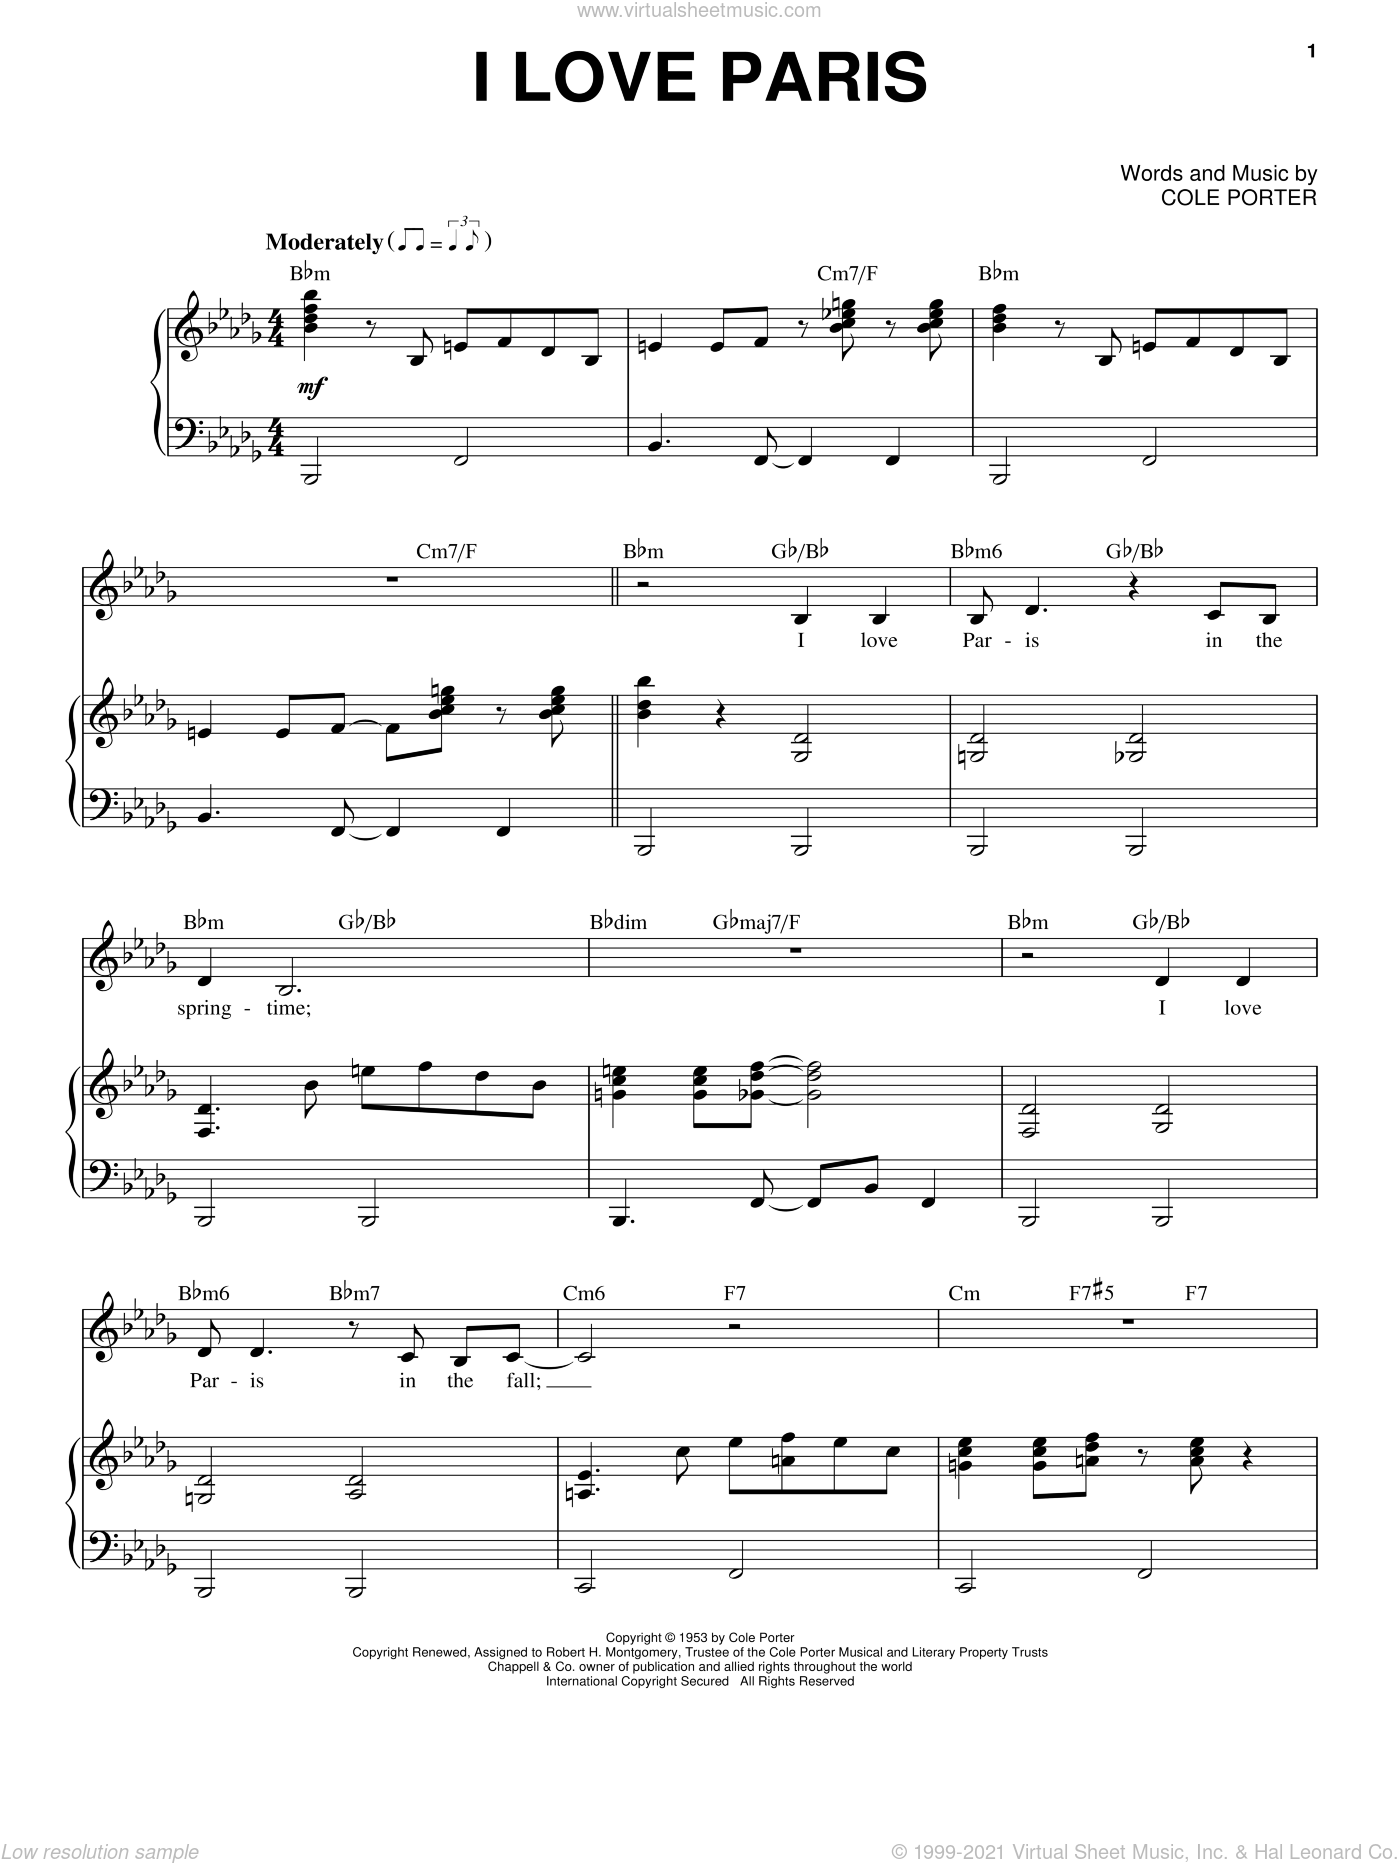 Sinatra - I Love Paris sheet music for voice and piano [PDF]